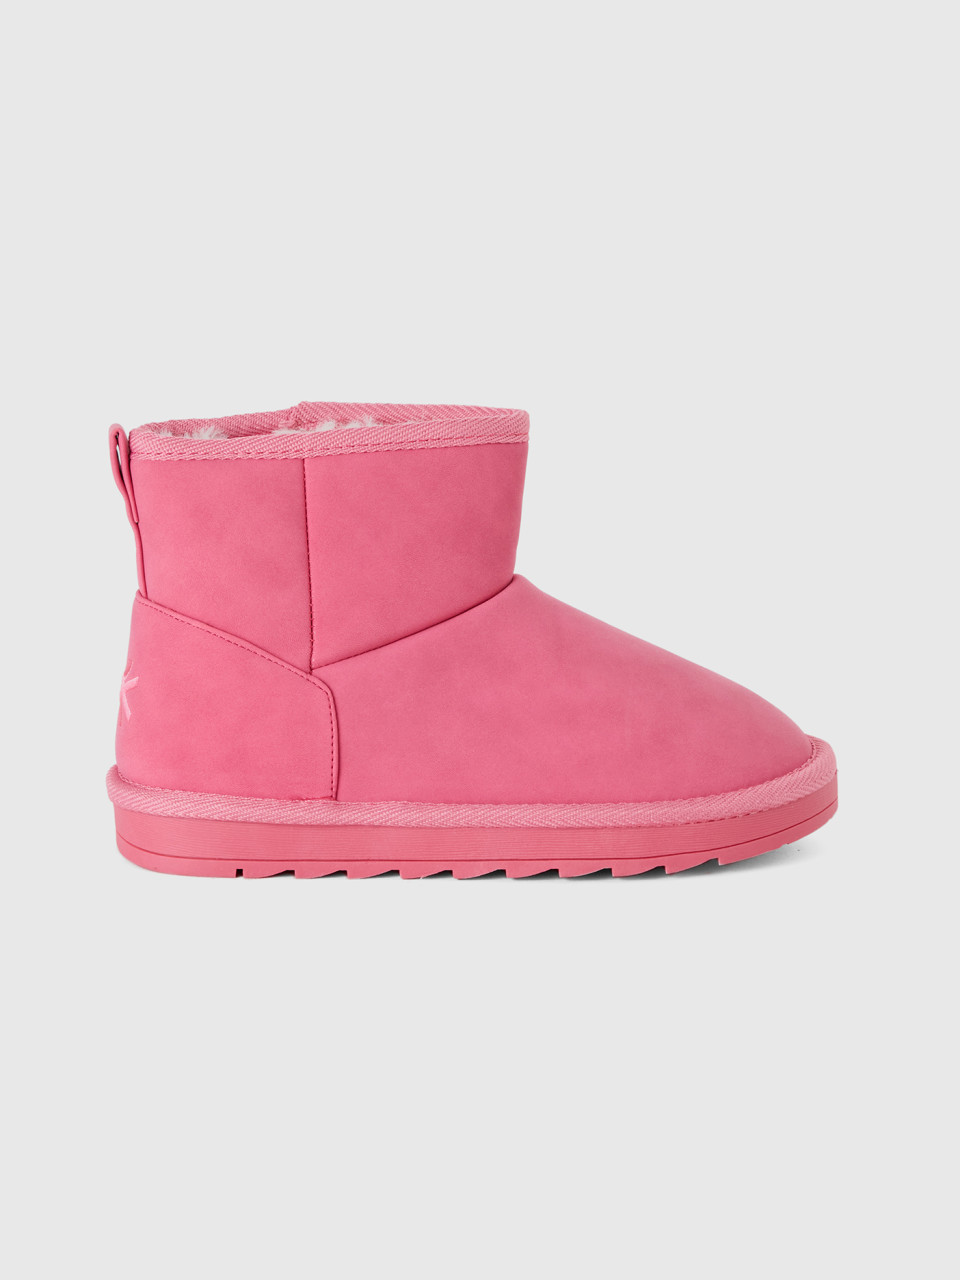 Benetton, Ankle Boots In Imitation Leather, Pink, Kids